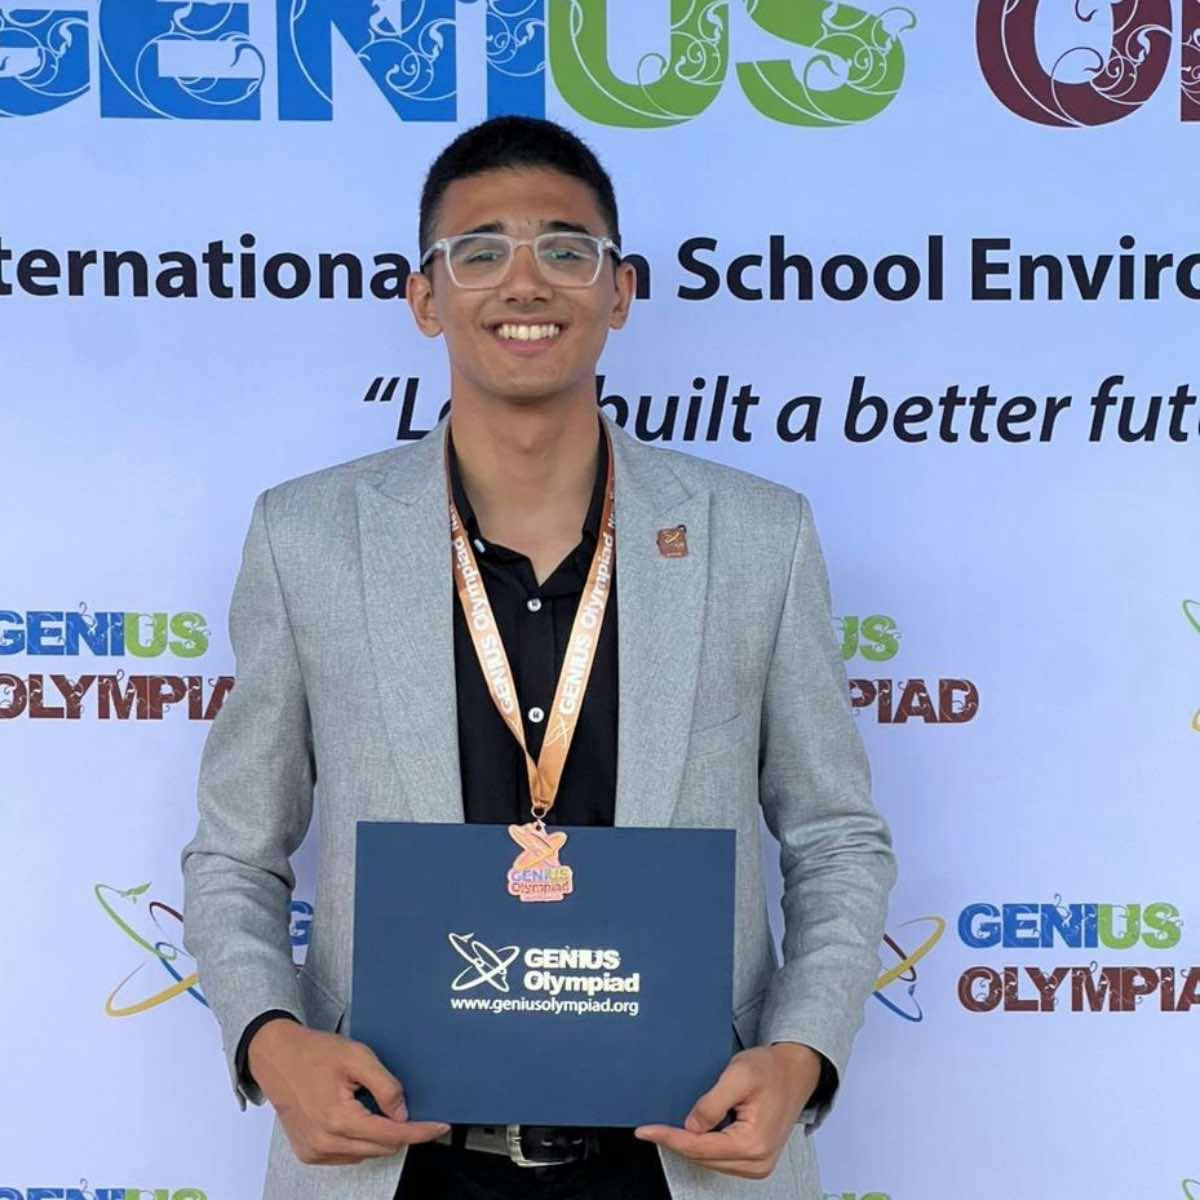 Winning Bronze and a $15,000 Scholarship at Genius Olympiad at Rochester Institute of Technology